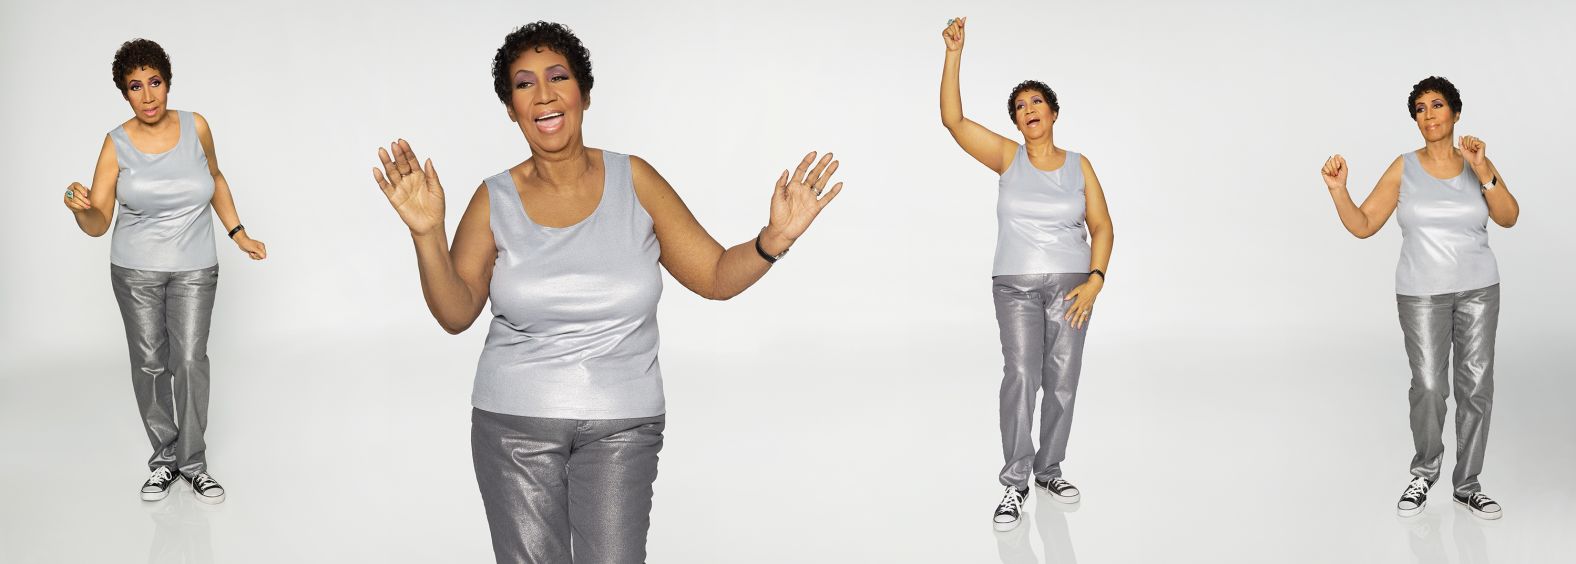 Franklin dances to her song "Sweet Sweet Baby (Since You've Been Gone)" during a photo shoot in Detroit in April 2014. The song was part of Smith's "Aretha Cool iPod mix," which was played during many of their photo sessions. 